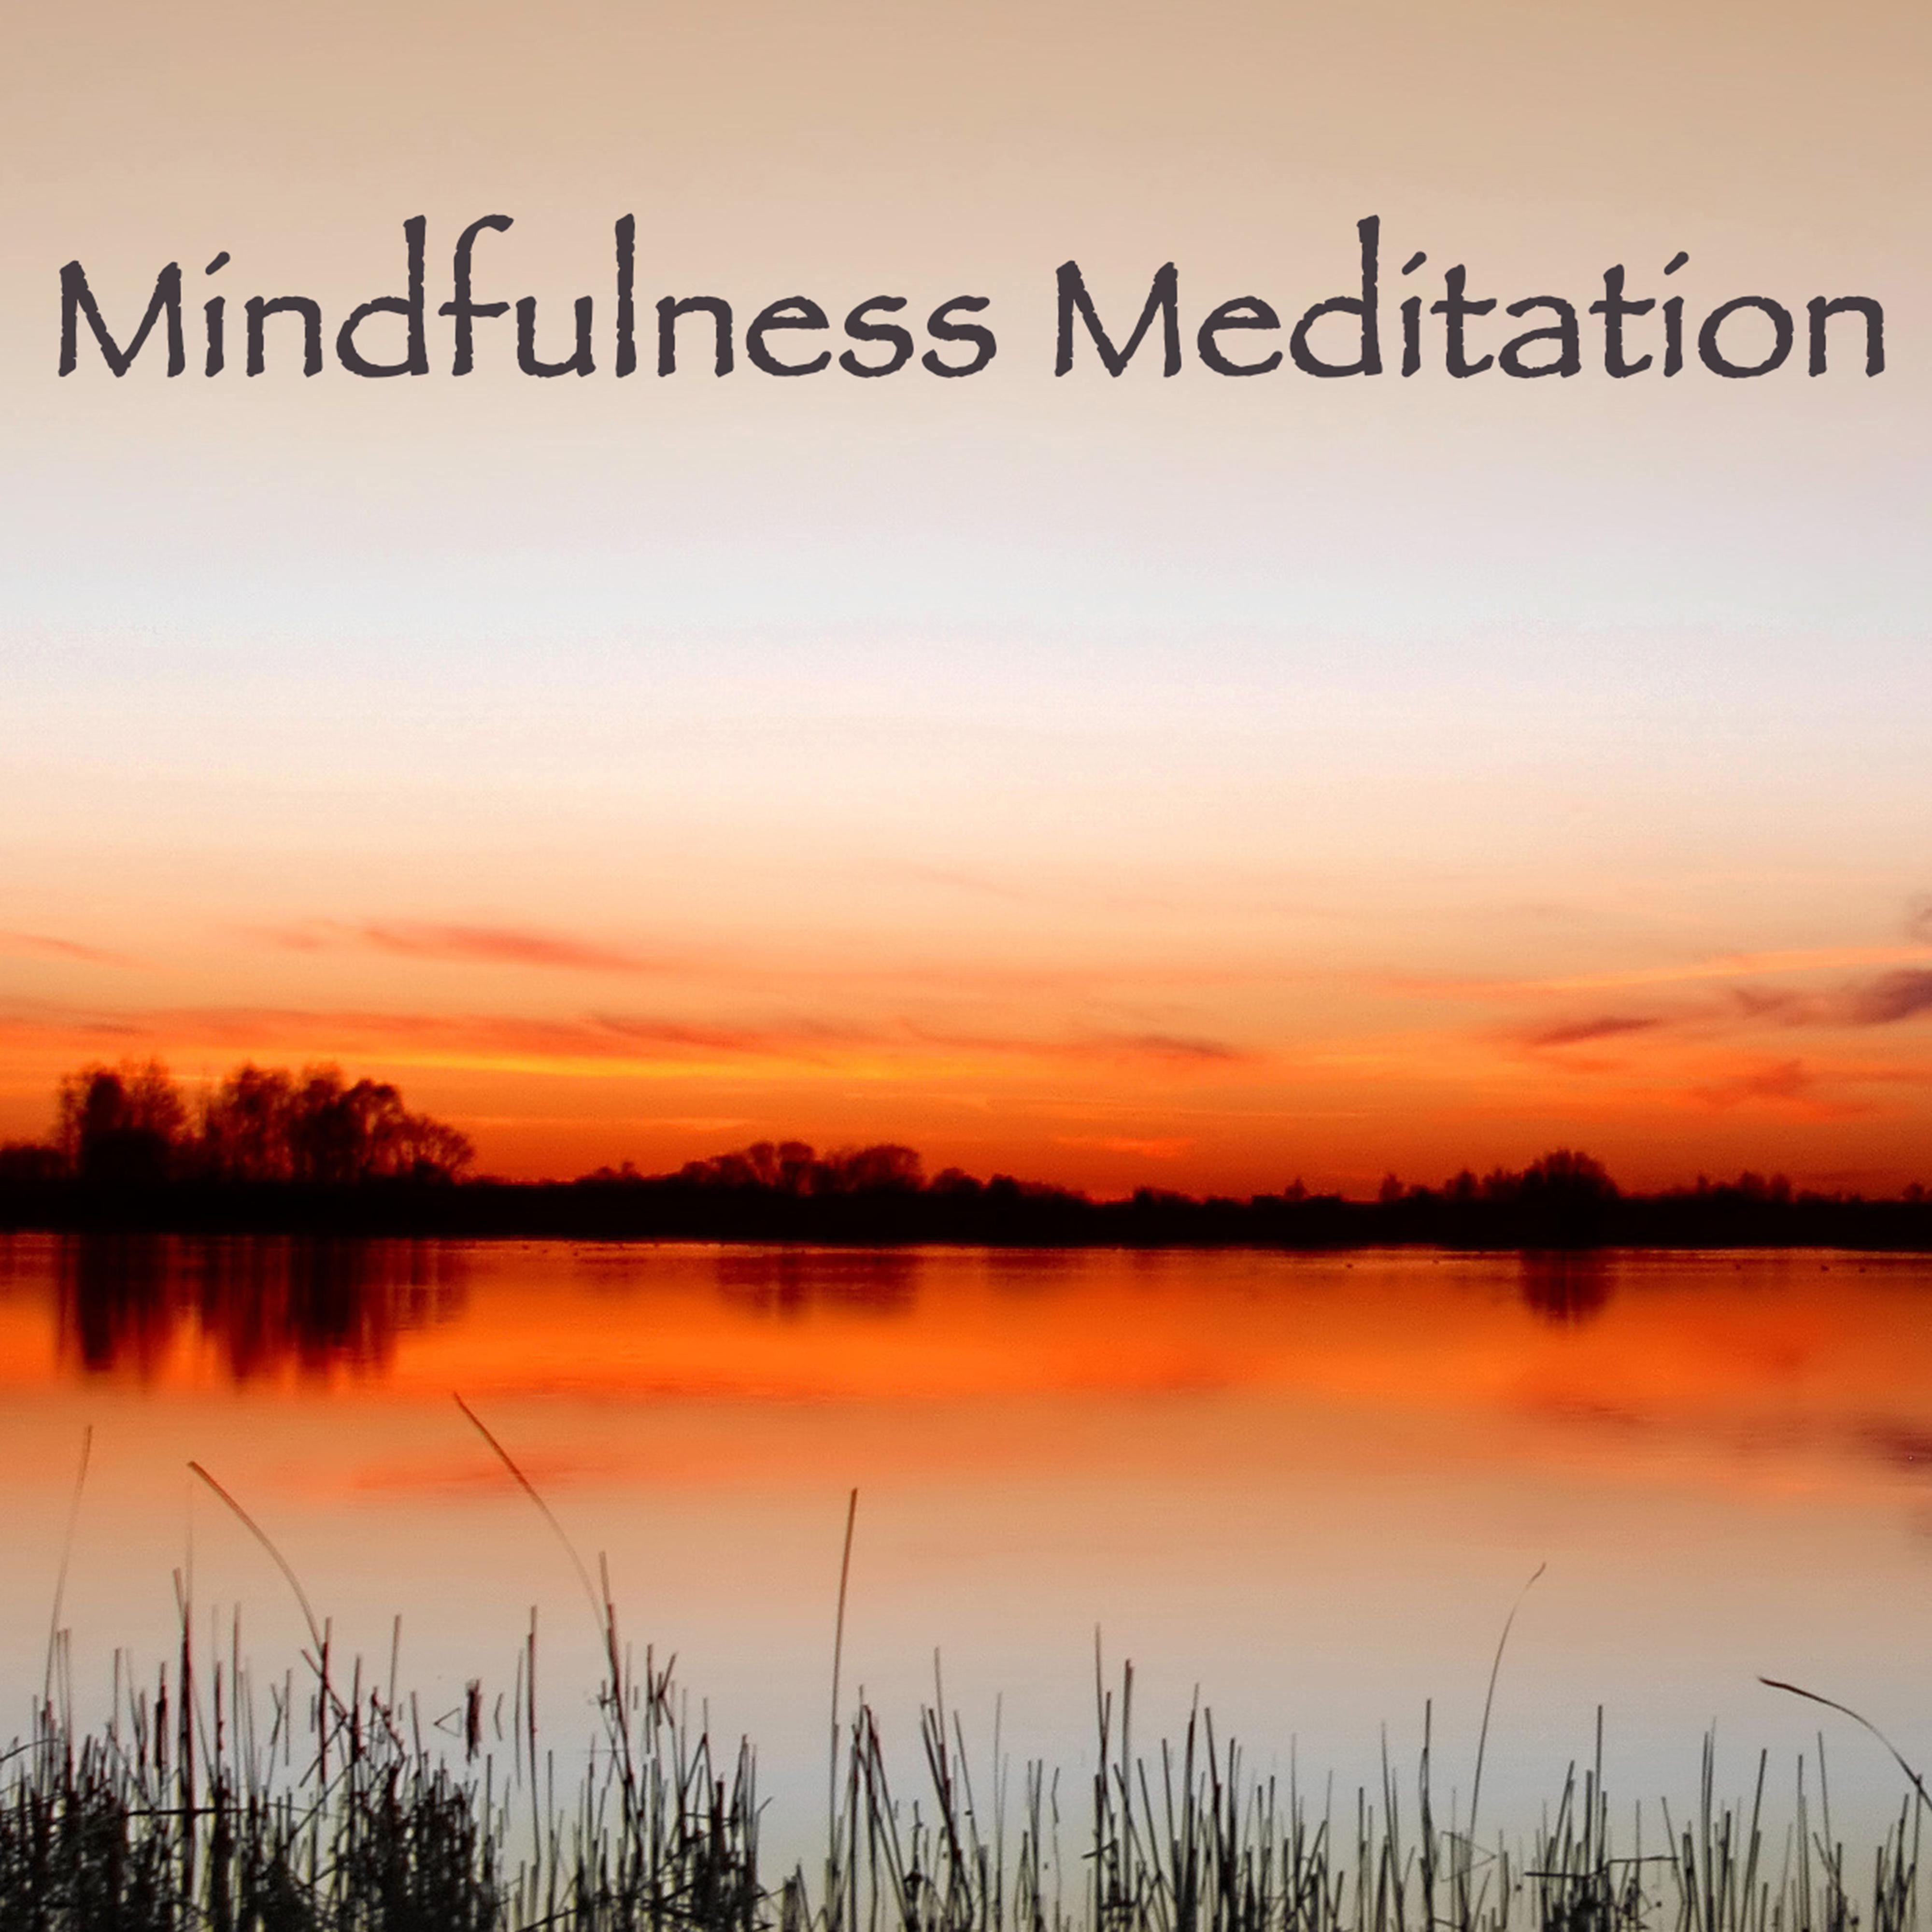 Mindfulness Meditation Spiritual Healing  Chillout Relaxation Music for Meditation, Relax and Sleep